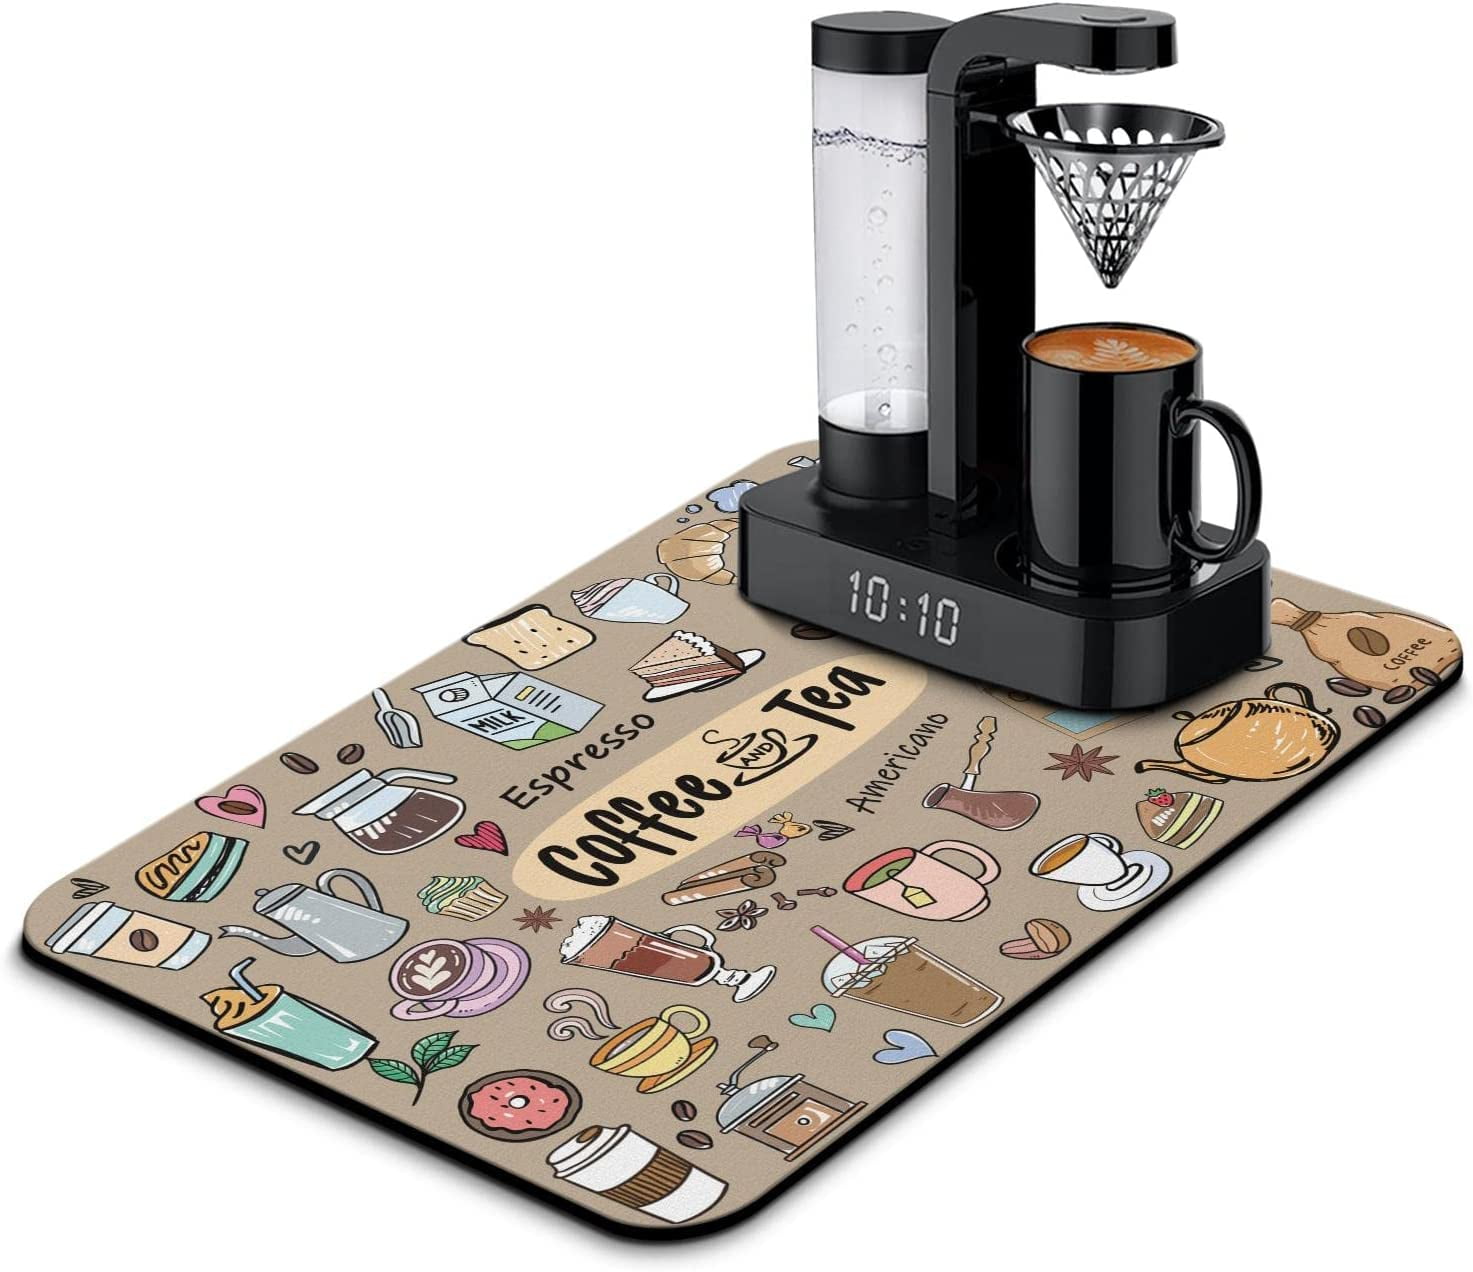  Coffee Mat - Countertop Mat for Coffee Station Bar Mats,  19x13in Hide Stain Rubber Backed Absorbent Dish Drying Mat for Kitchen  Counter Fit Under Coffee Maker Machine (grey): Home & Kitchen